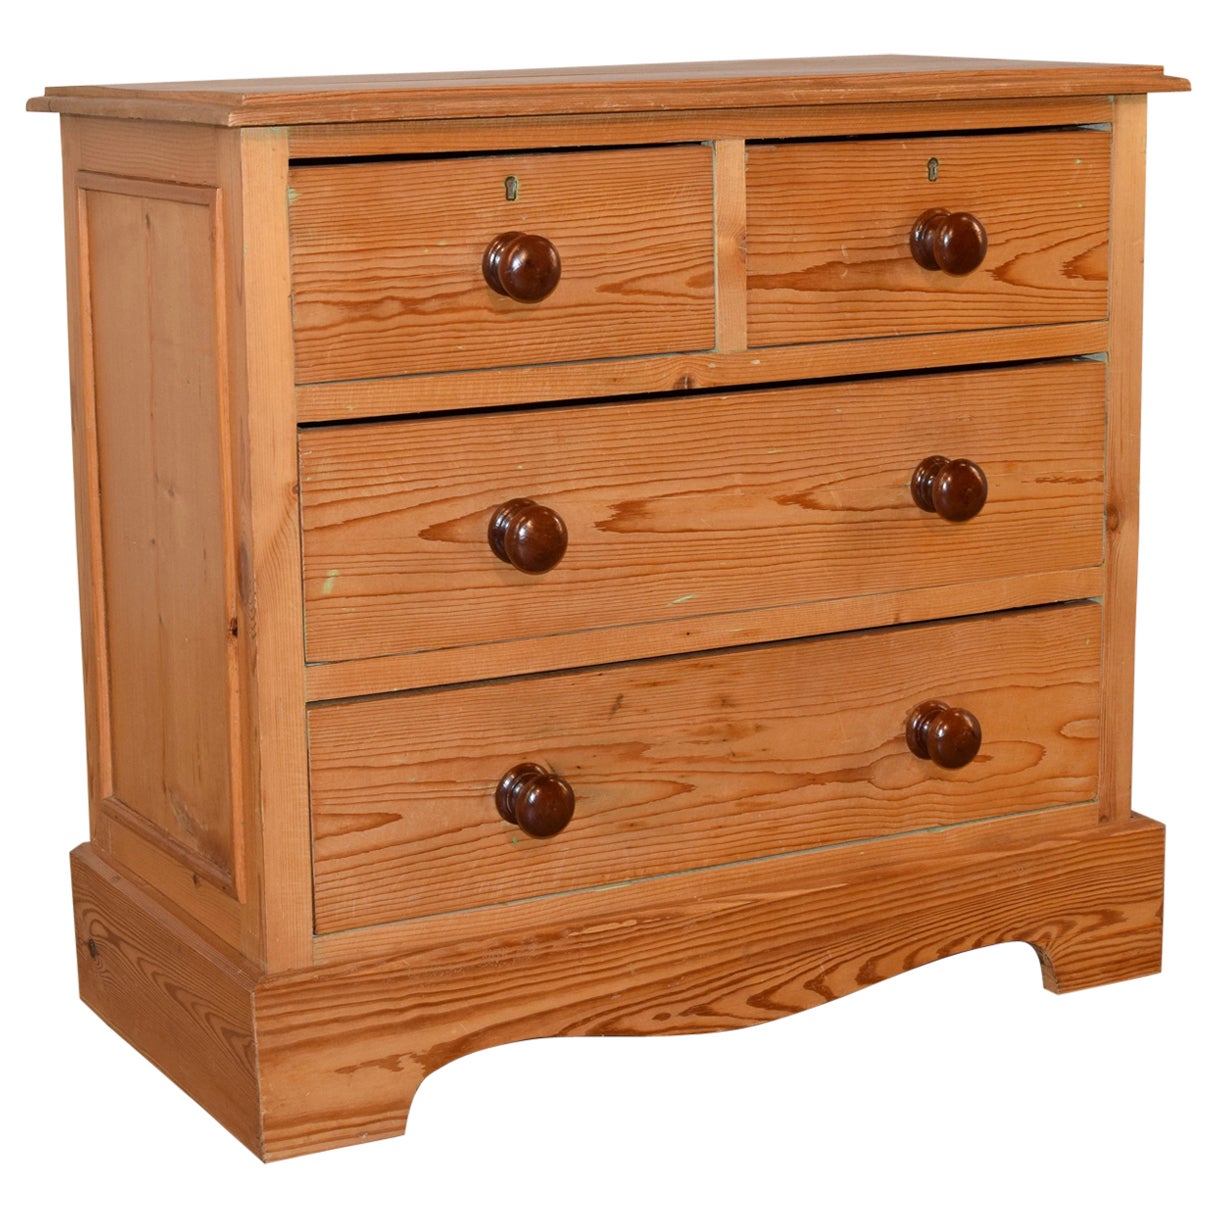 19th Century Small Pine Chest of Drawers For Sale